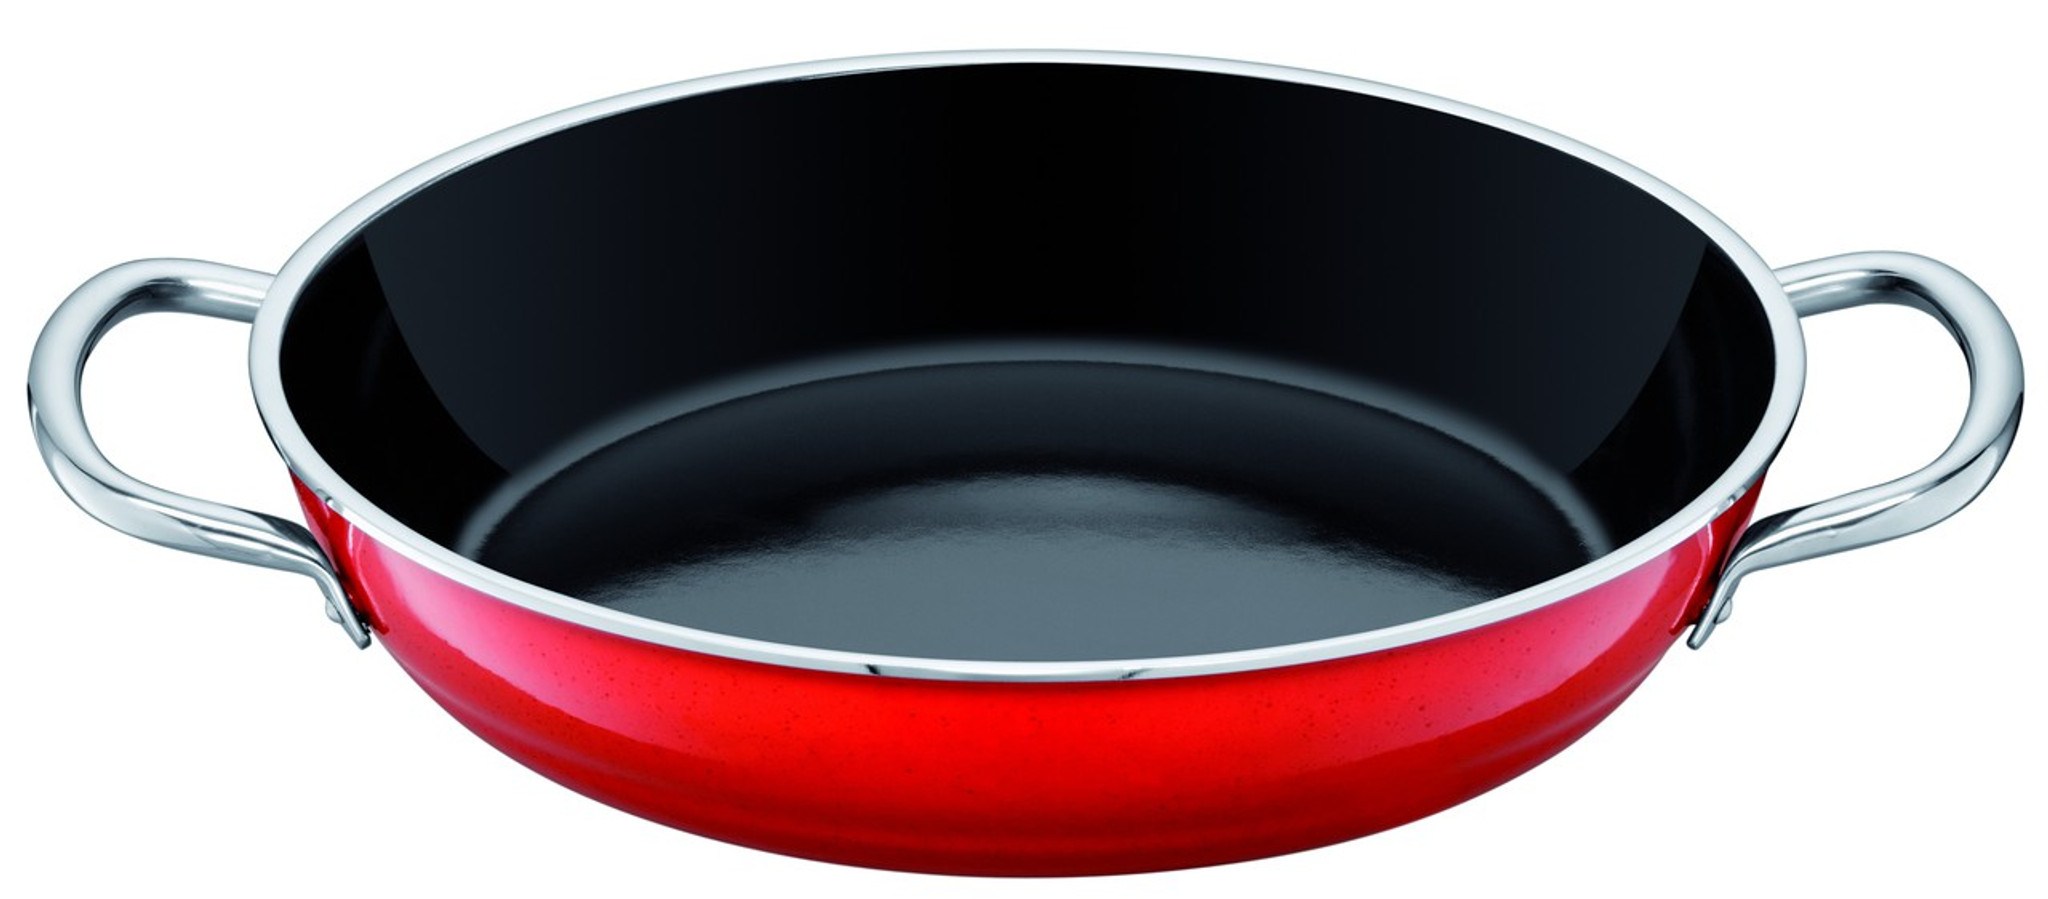 Silit Passion Colors Fry Serve Pan 11 Inch with Handles Energy Red UPC: 744004430738 -